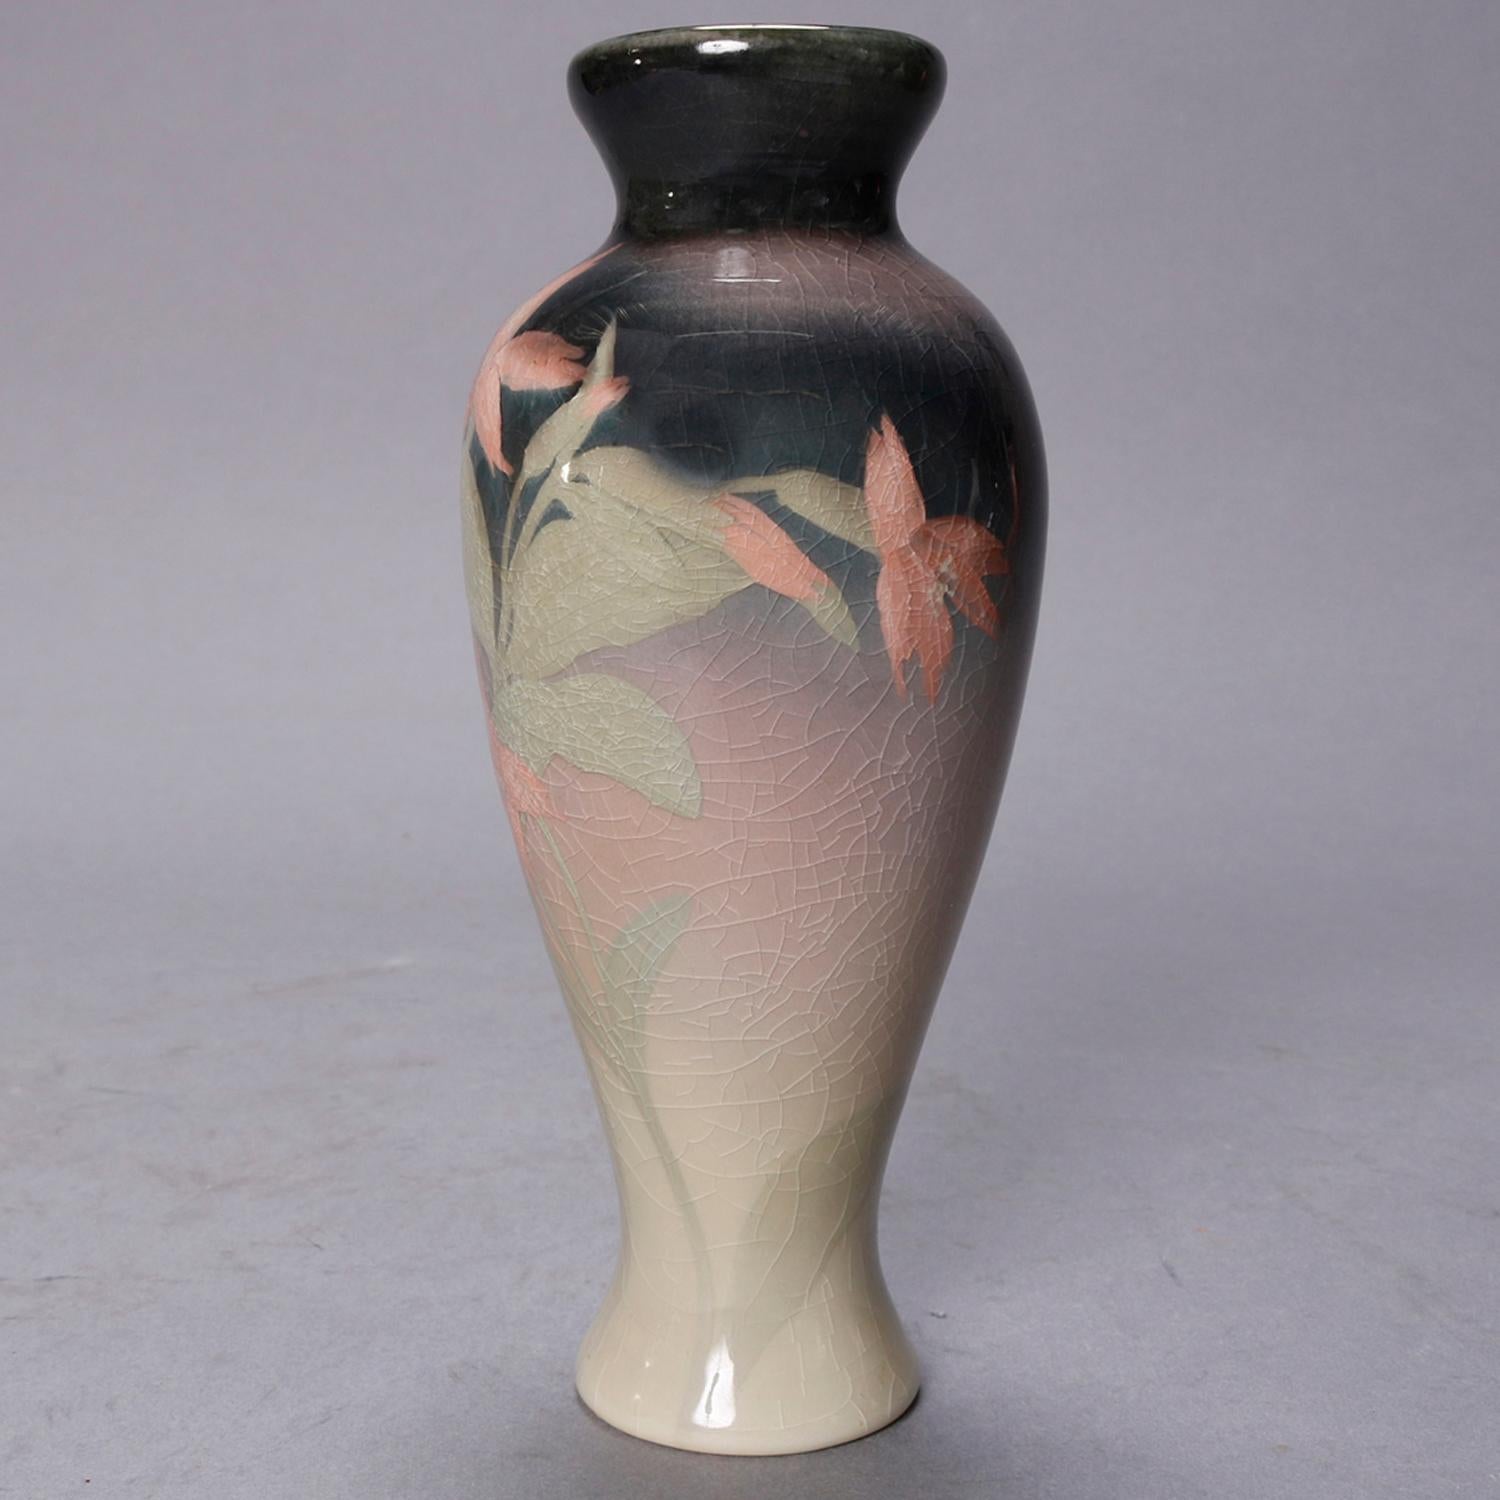 An artist signed art pottery vase by Olga Geneva Reed for Rookwood offers ombre coloring with tiger lilies and iris glaze, maker mark and artist initialed on base, 19th century. 

Measures - 7.25